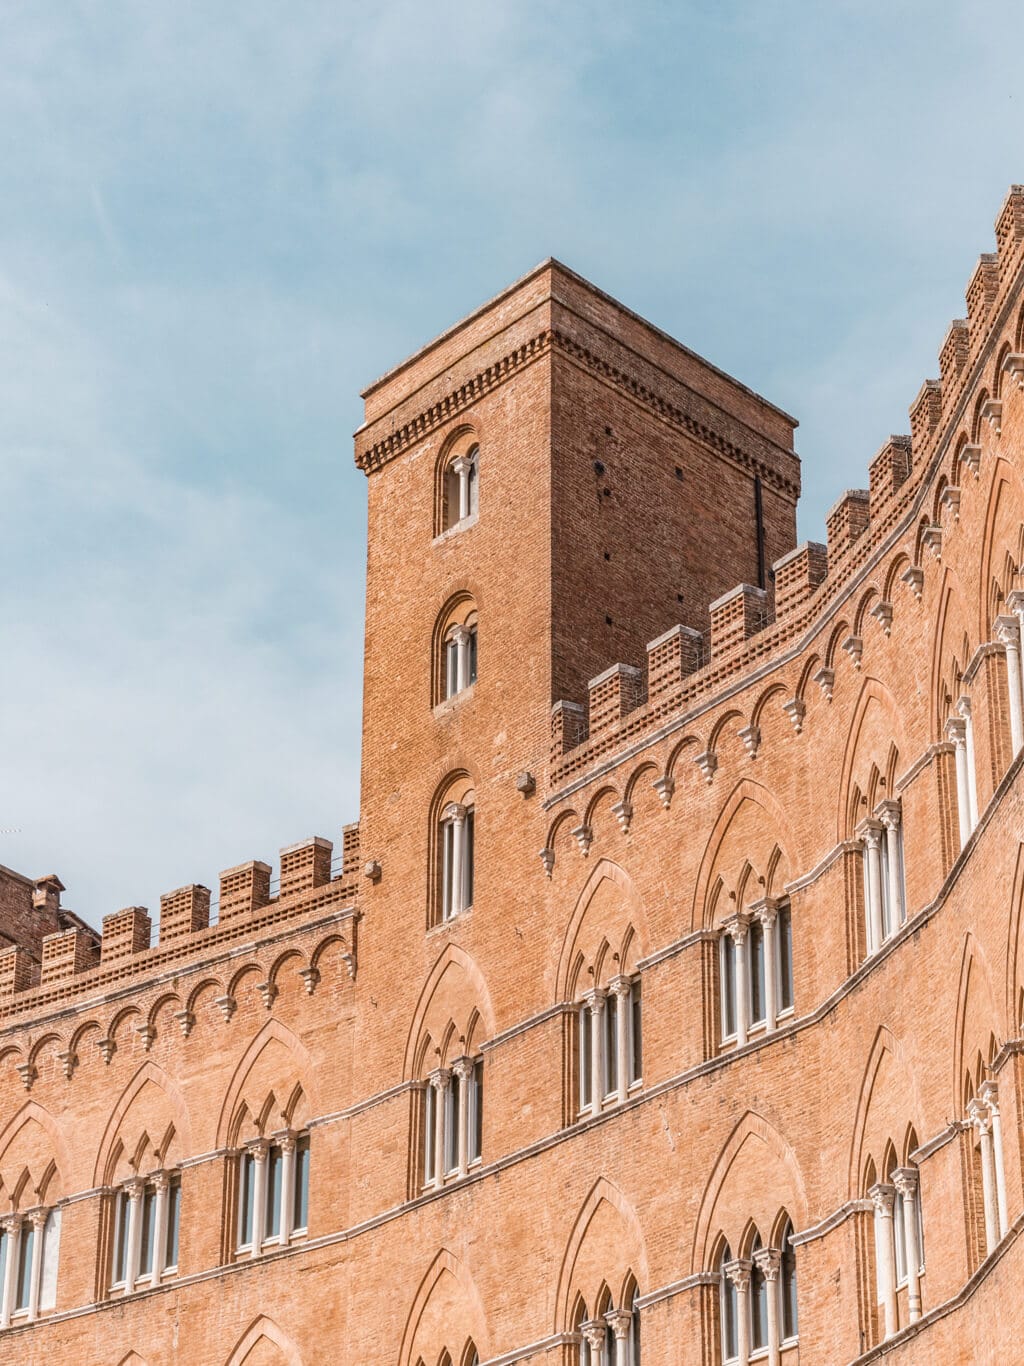 Sienna || A Guide For Planning A Trip To Tuscany, Italy - Things to do, including food & restaurants tips, wineries, and road trip tips